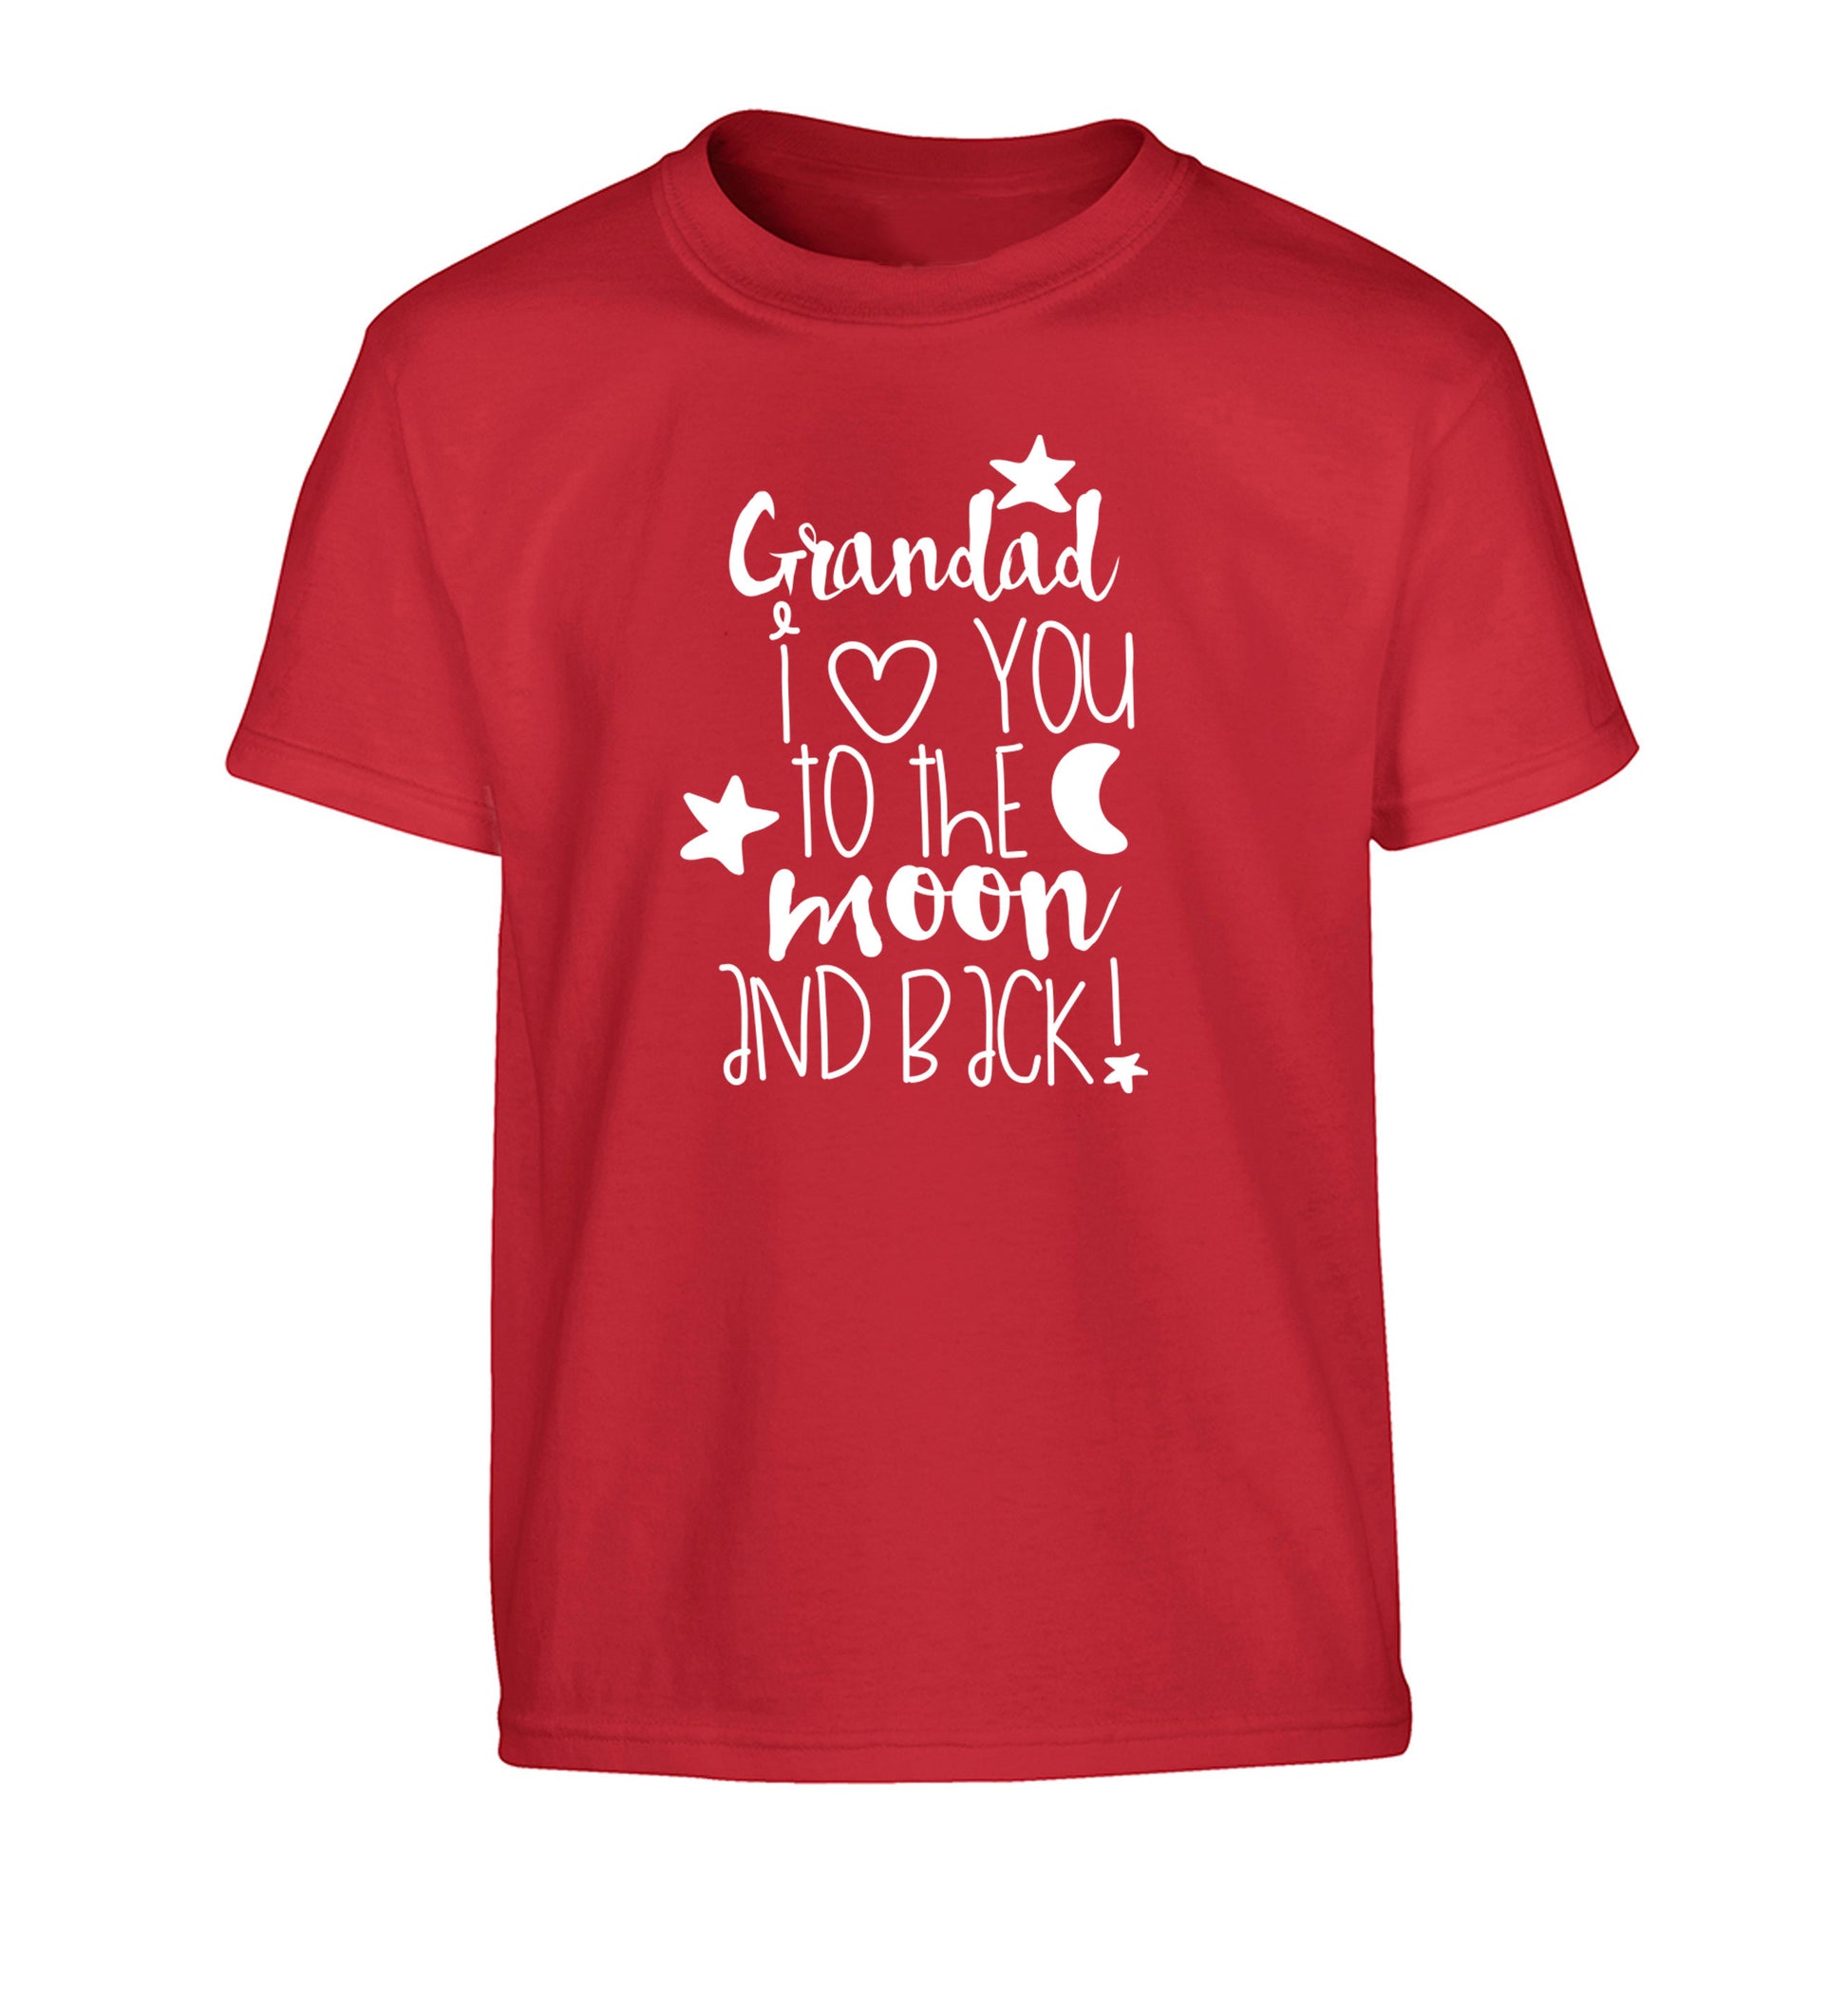 Grandad's I love you to the moon and back Children's red Tshirt 12-14 Years